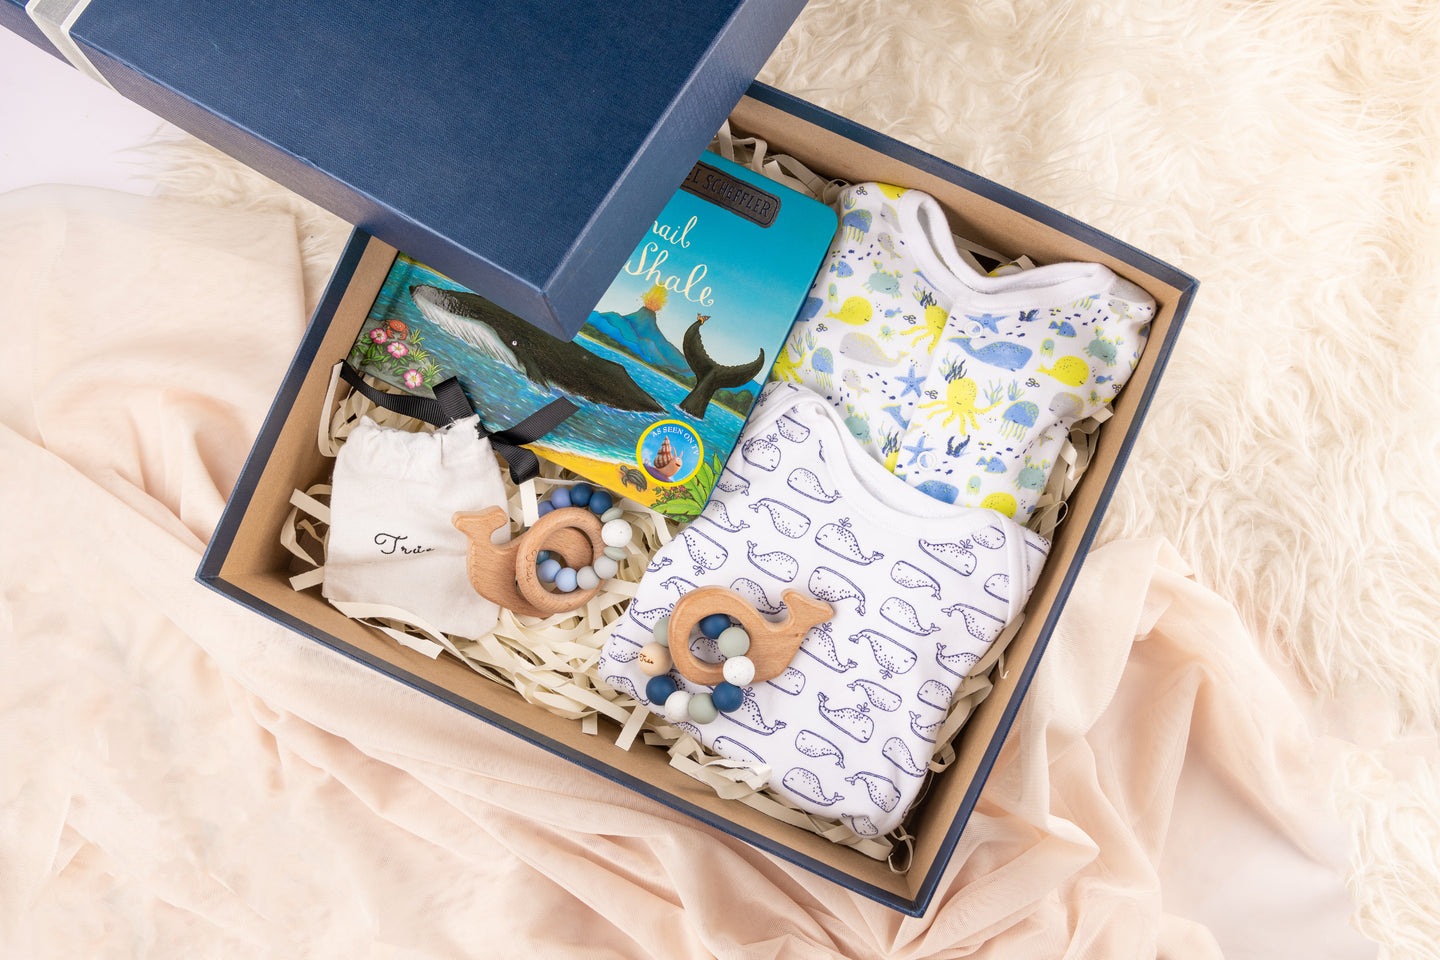 Baby Gift Box with curated items consisting of a teether rattle, organic baby clothing, board book and baby accessories.